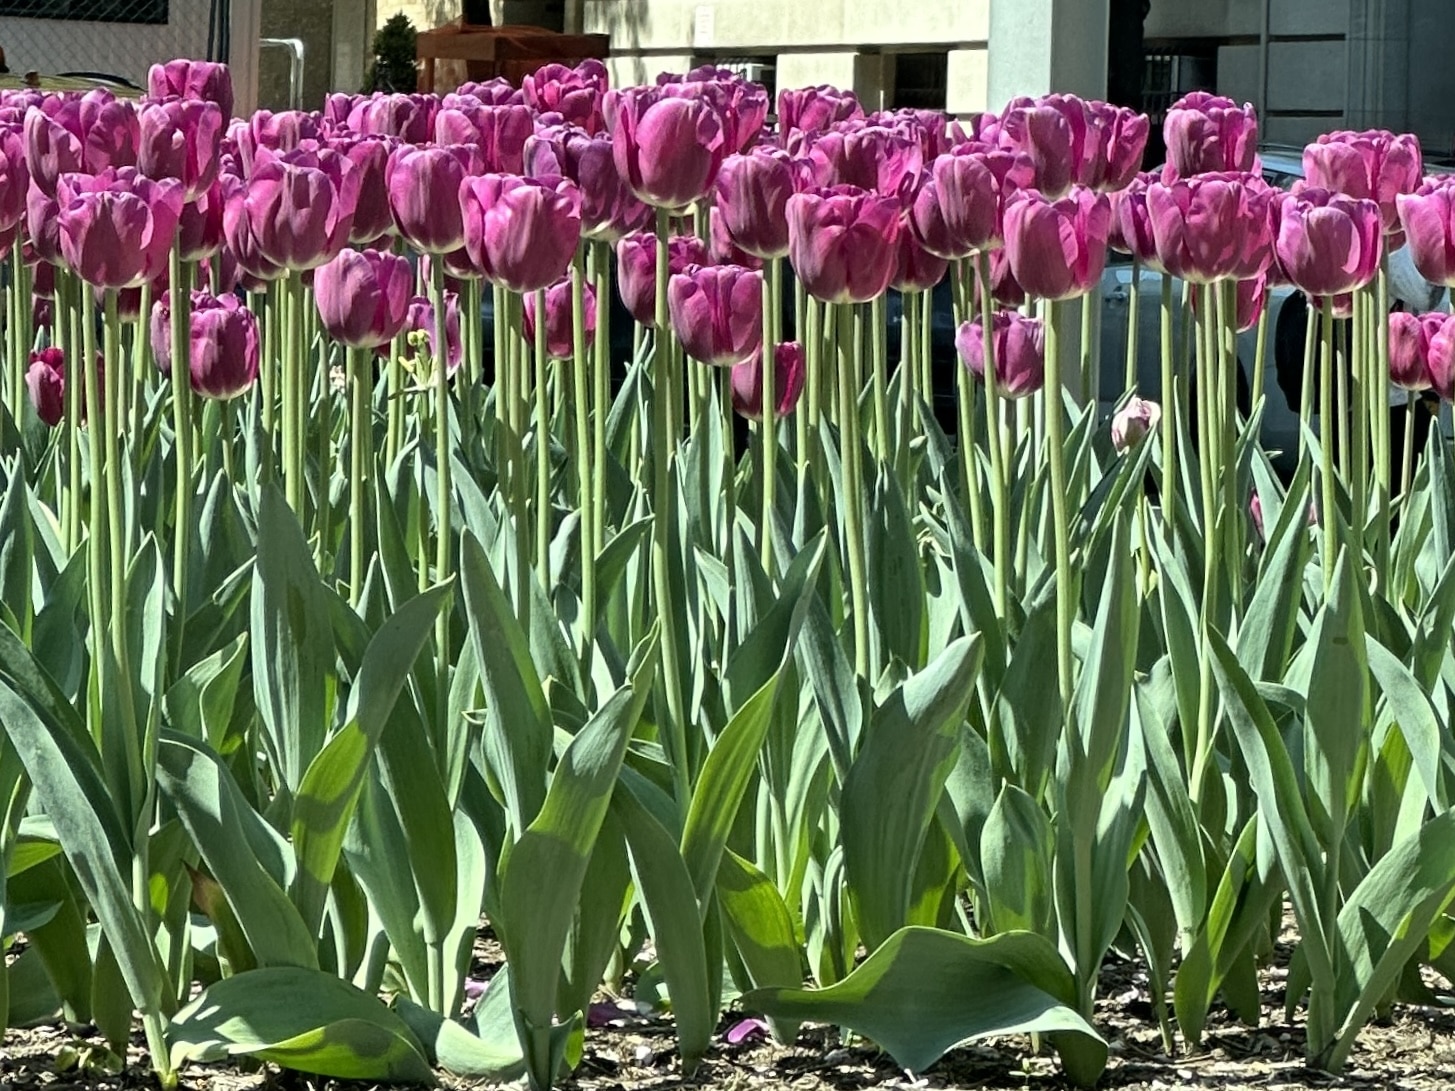 The annual Park Avenue Tulip Dig returns to the Upper East Side later this month | Upper East Site